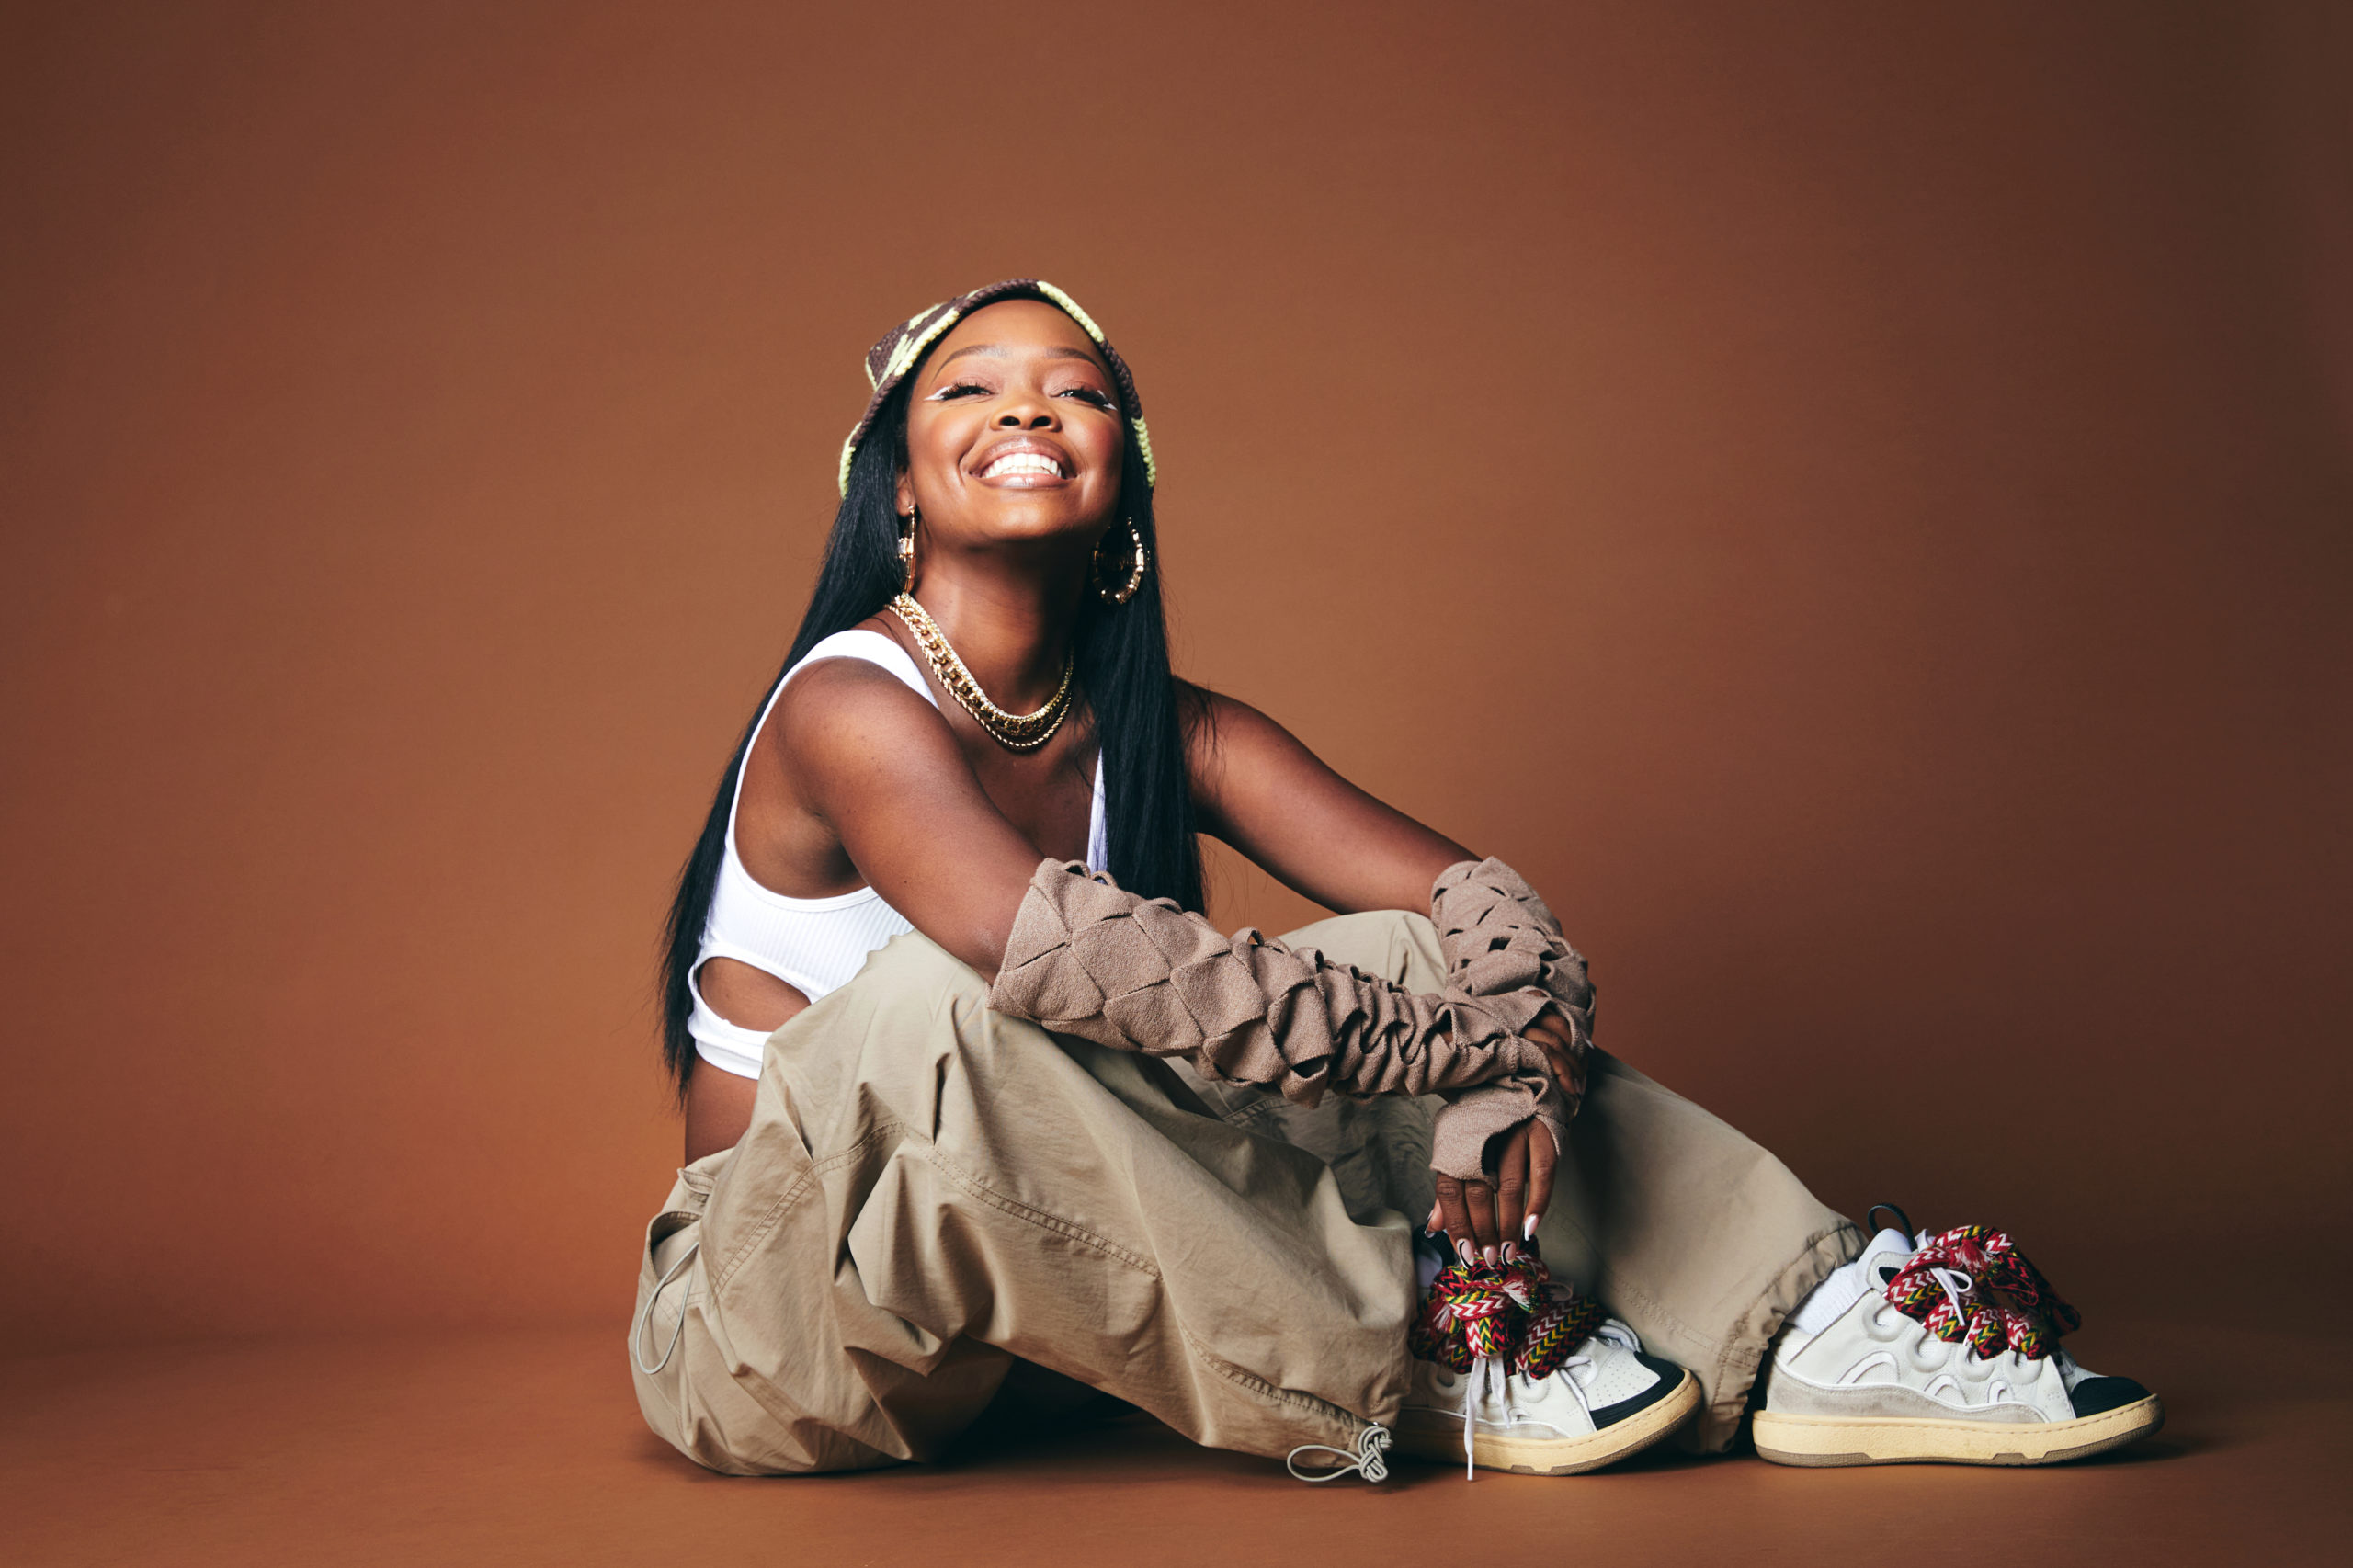 Charm La'Donna sits against a dark orange backdrop, smiling hugely at the camera. Her elbows are draped over her knees, one wrist clasping the other. She wears chunky sneakers, baggy beige pants with matching arm warmers, and a white crop top. Her black hair is straight and falls to her waist. She wears hoop earrings and a flat beaded necklace.